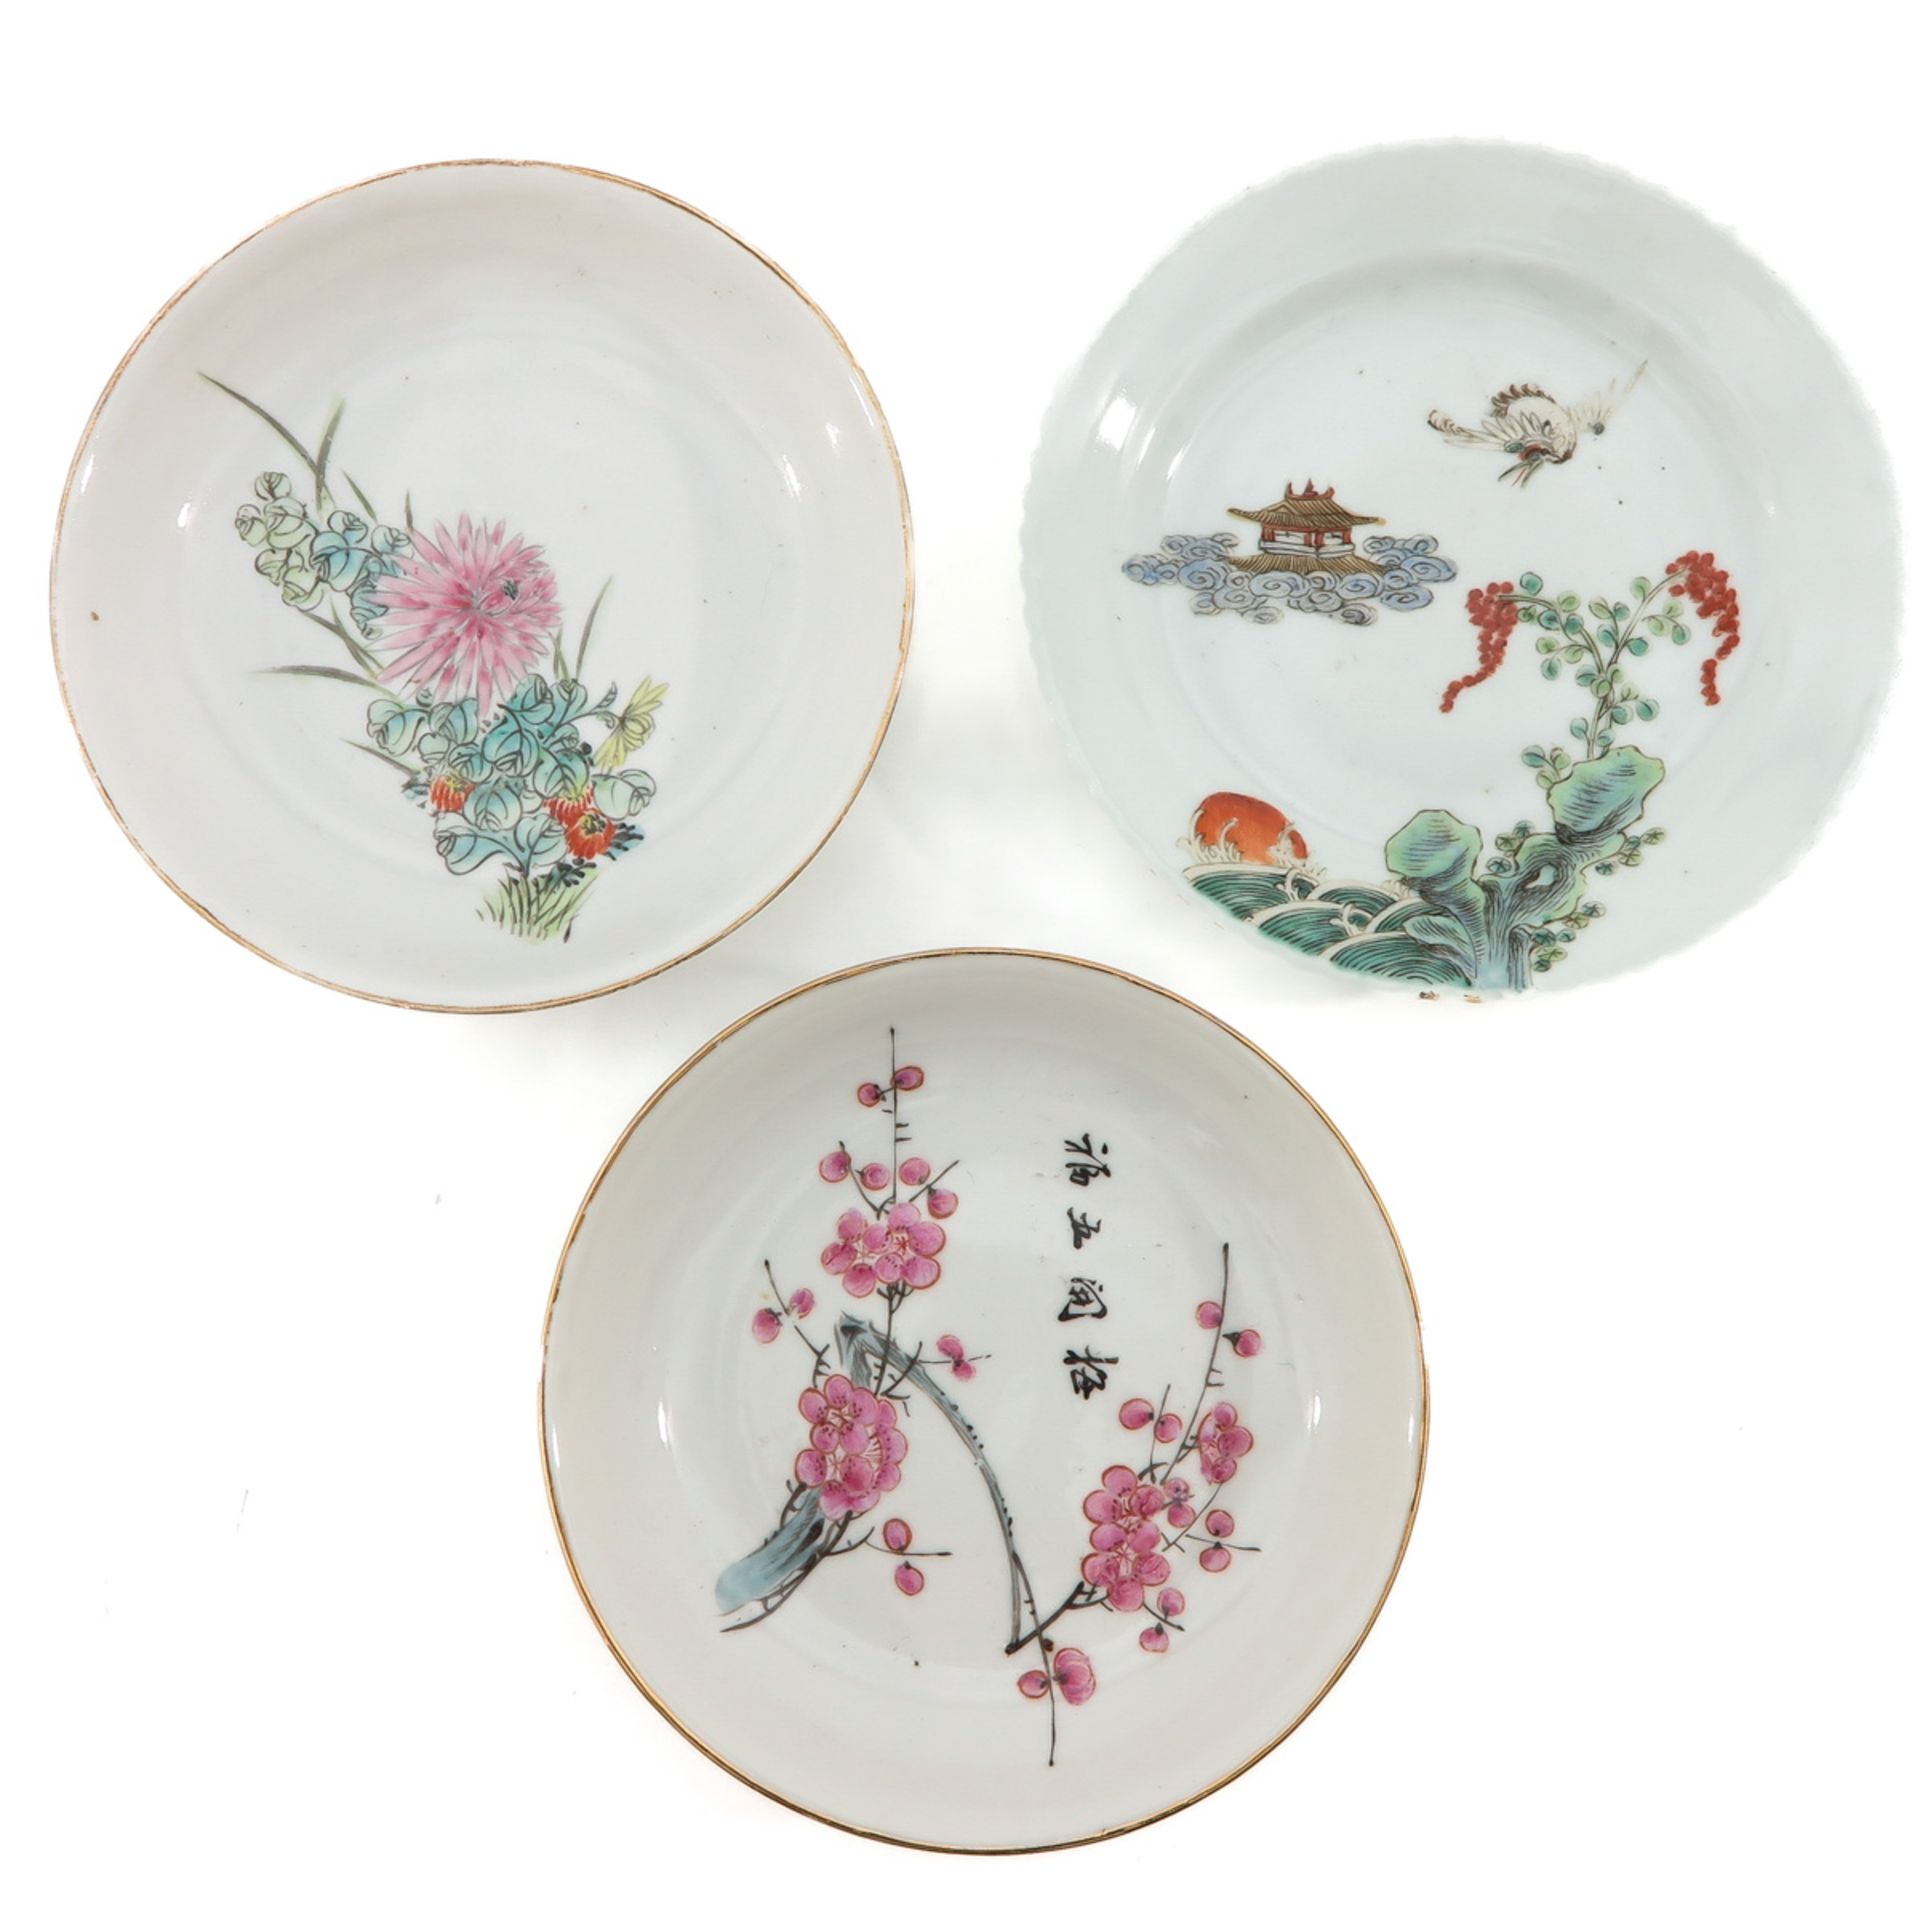 A Collection of 3 Polychrome Decor Plates